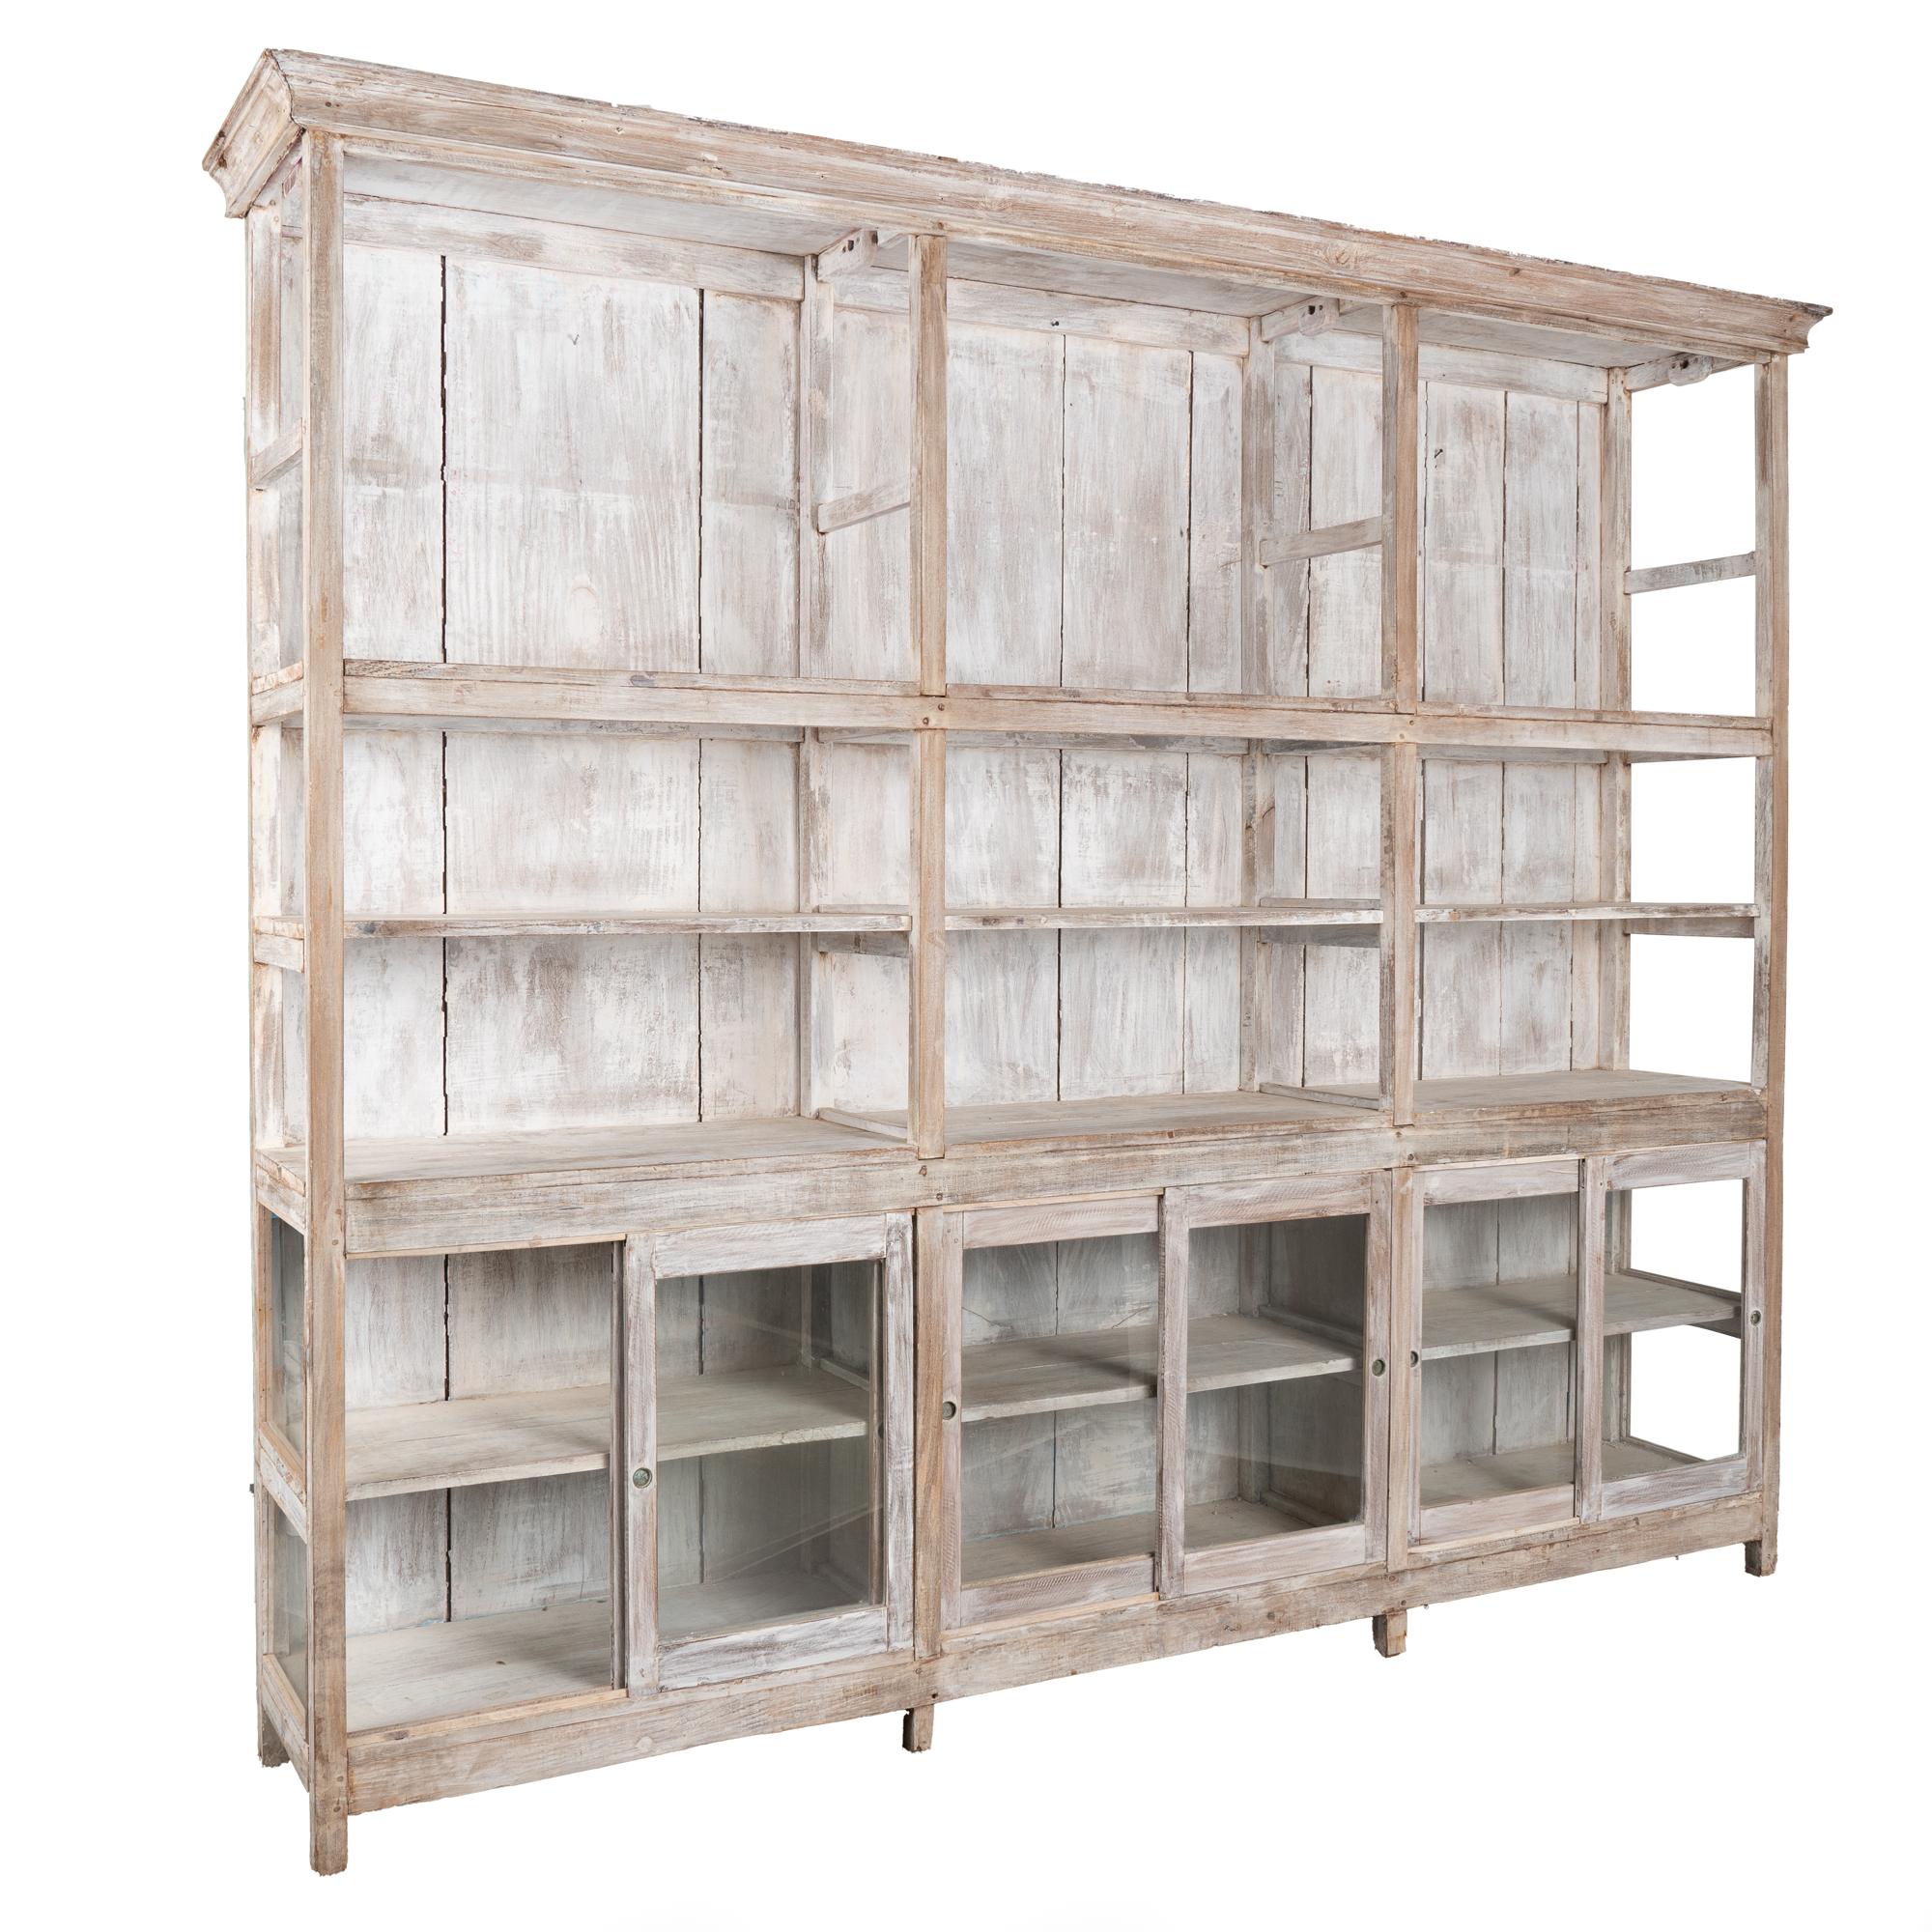 Large vintage display cabinet or bookcase with open shelving above and six sliding glass doors below. White washed painted finish.
Shelf depth of upper/open section:
Top and Bottom Shelves are 17.5